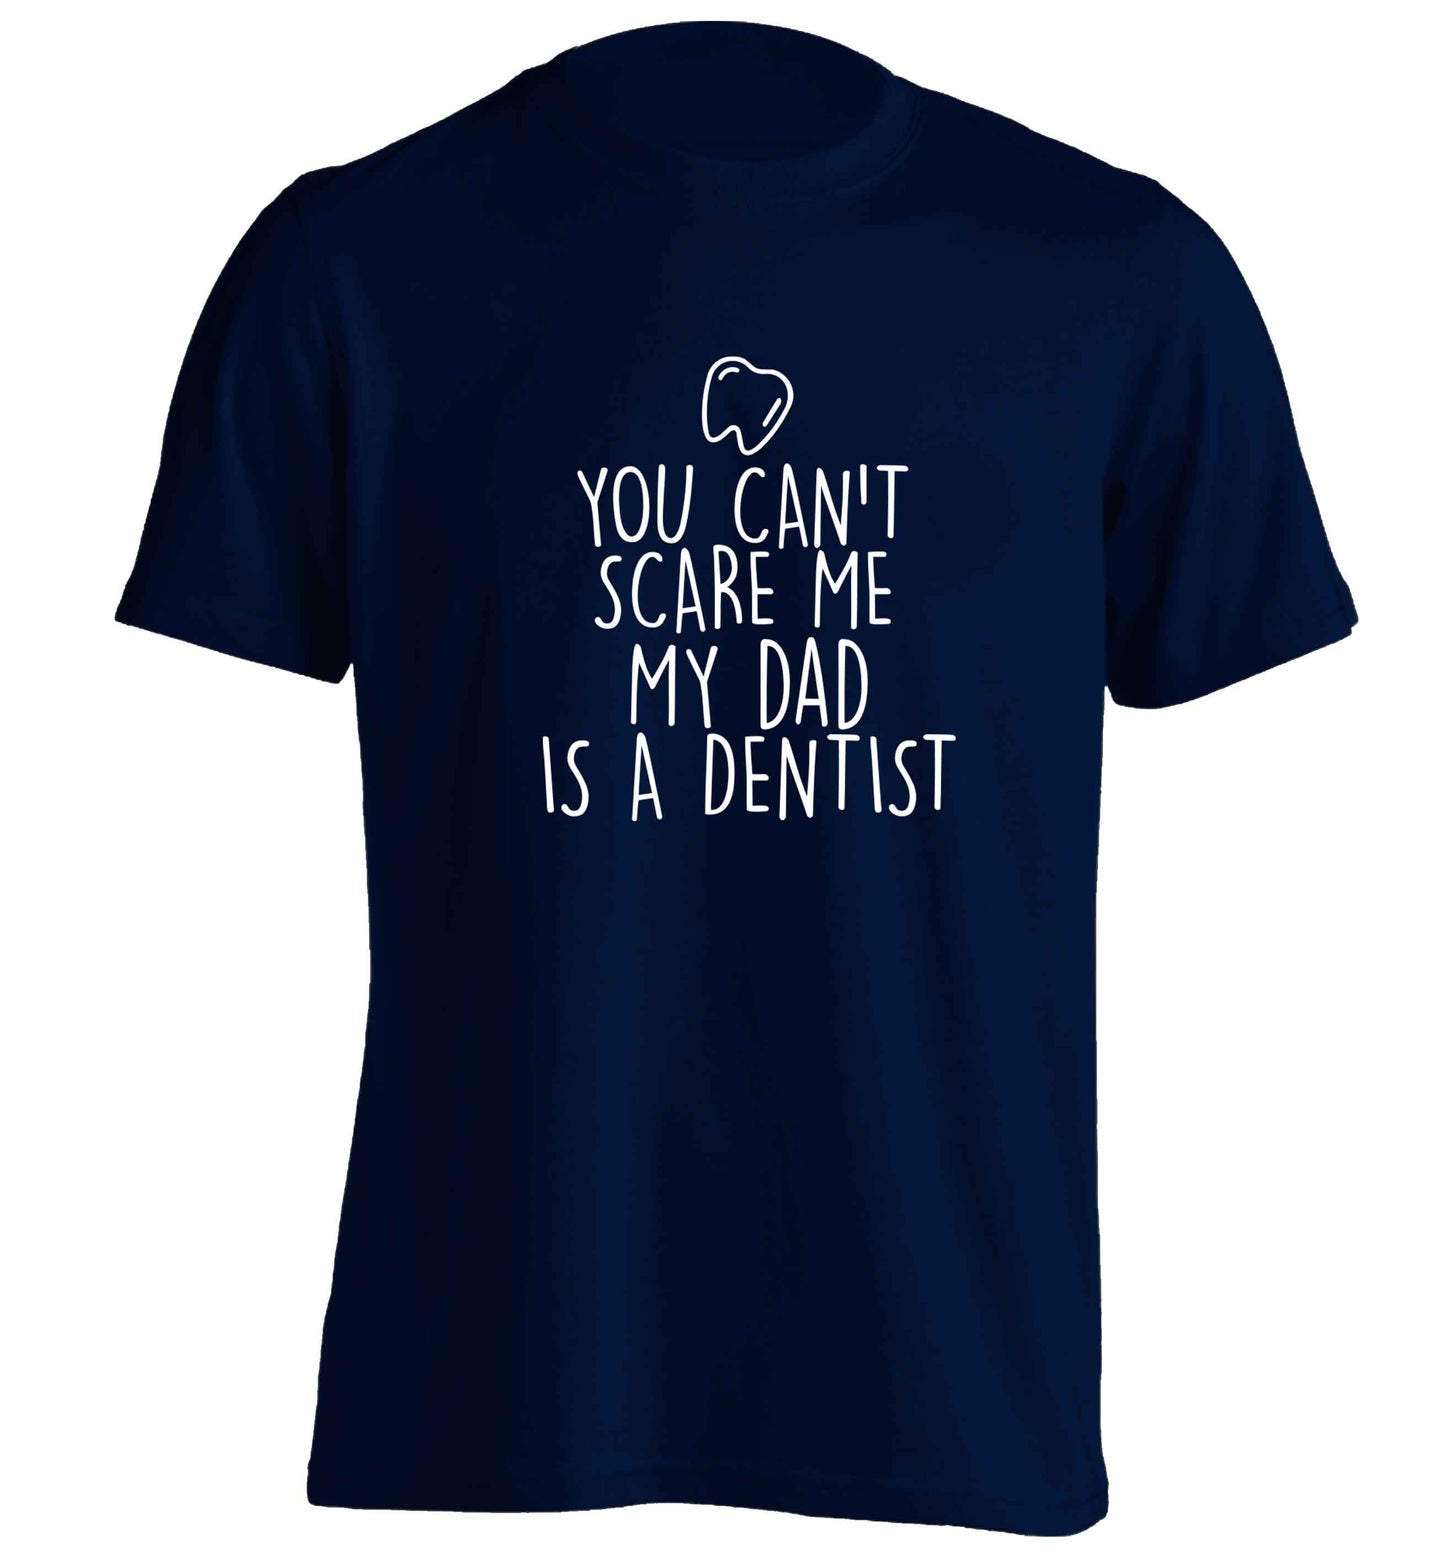 You can't scare me my dad is a dentist adults unisex navy Tshirt 2XL